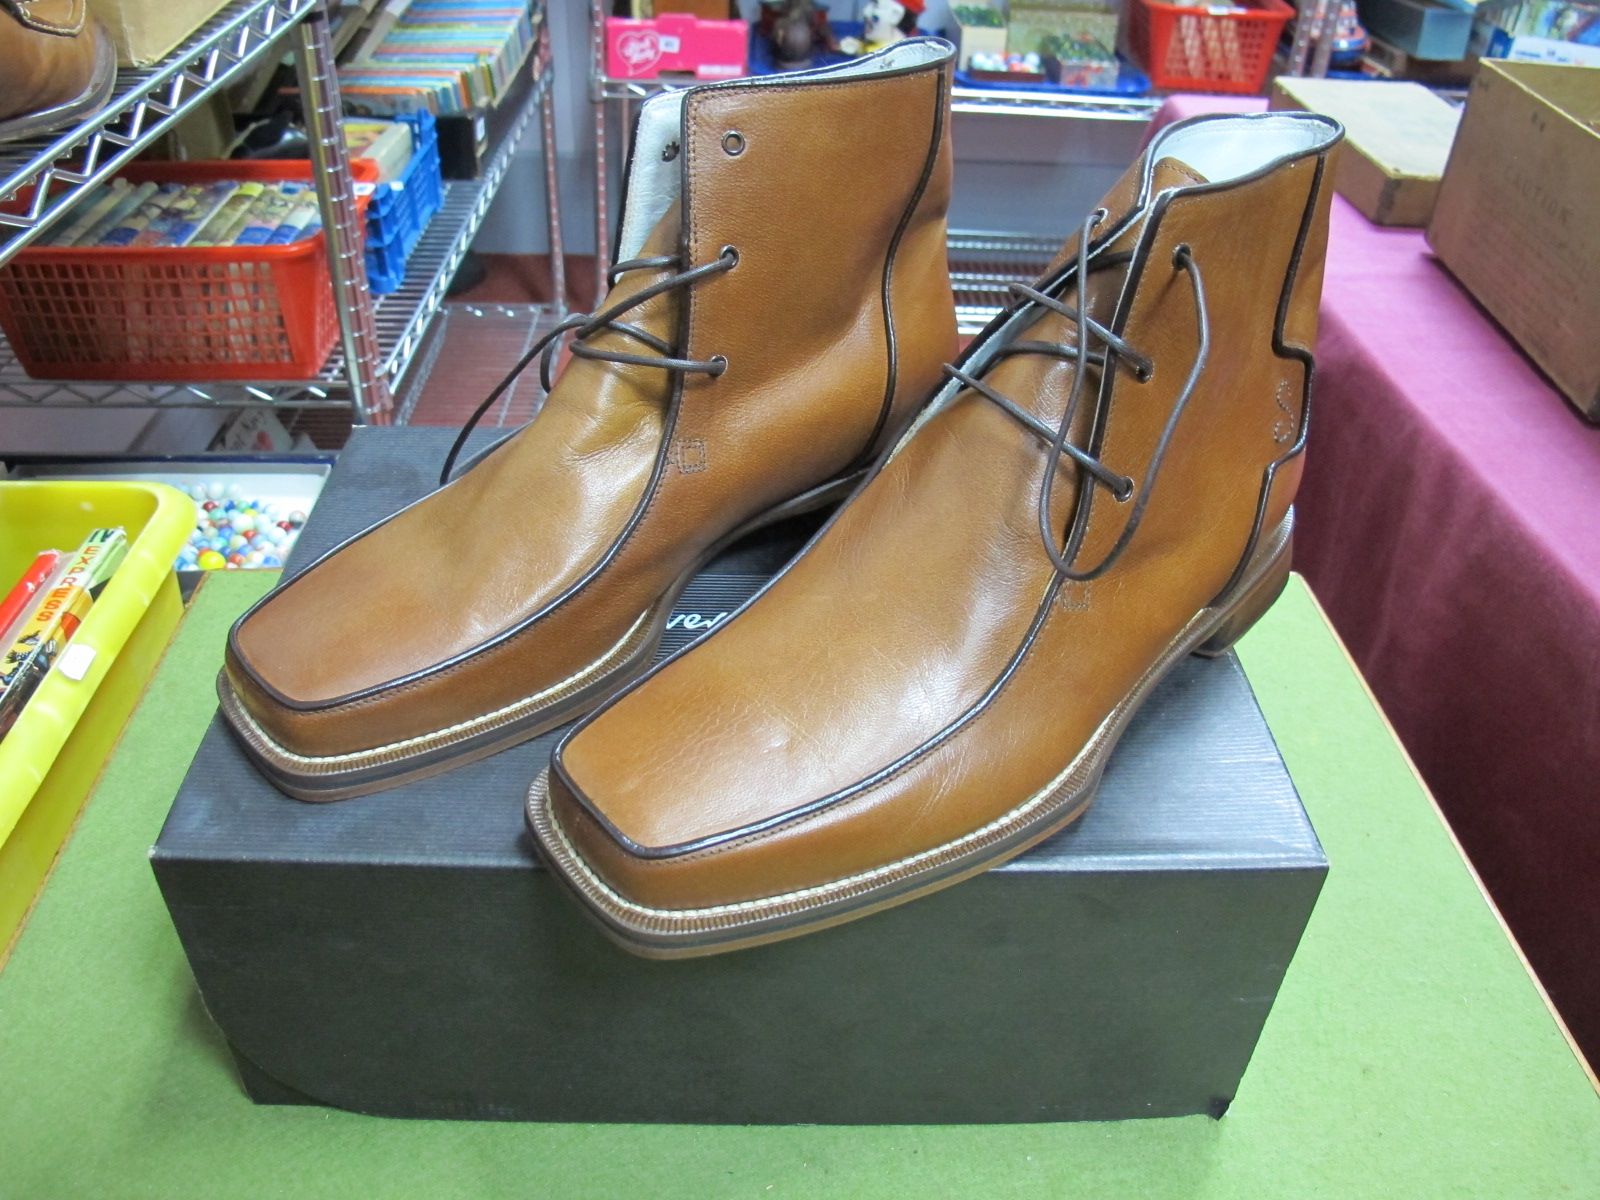 A Pair of Gents Oliver Sweeney 'Soho' Antique Camel Leather Lace-up Boots, size 9.5, unworn (